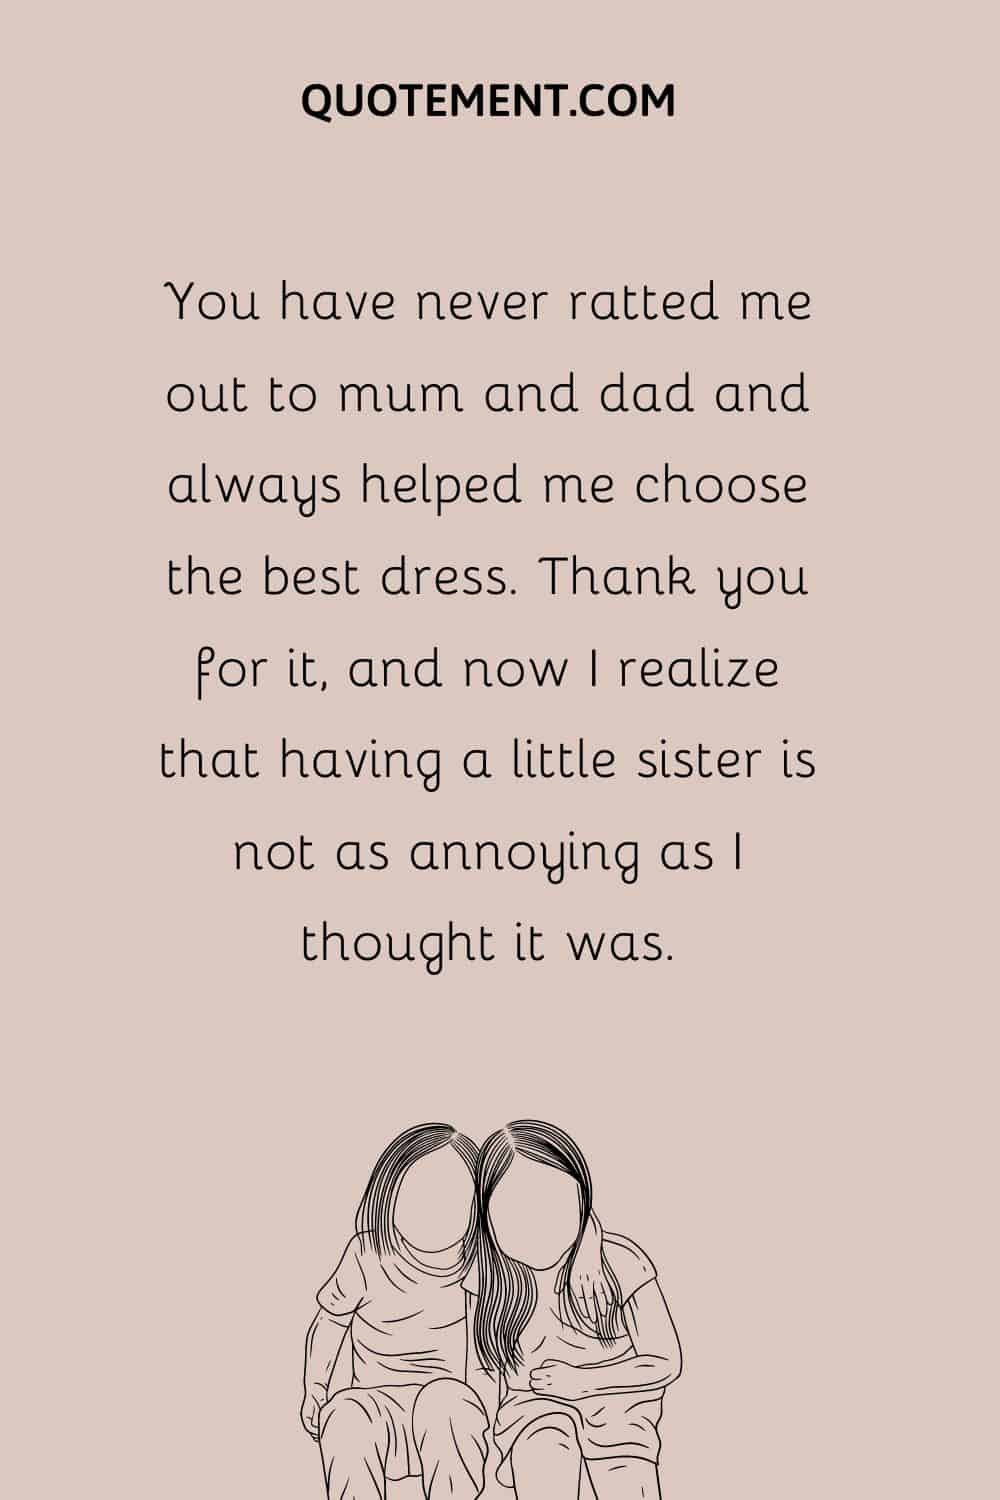 You have never ratted me out to mum and dad and always helped me choose the best dress. Thank you for it, and now I realize that having a little sister is not as annoying as I thought it was.